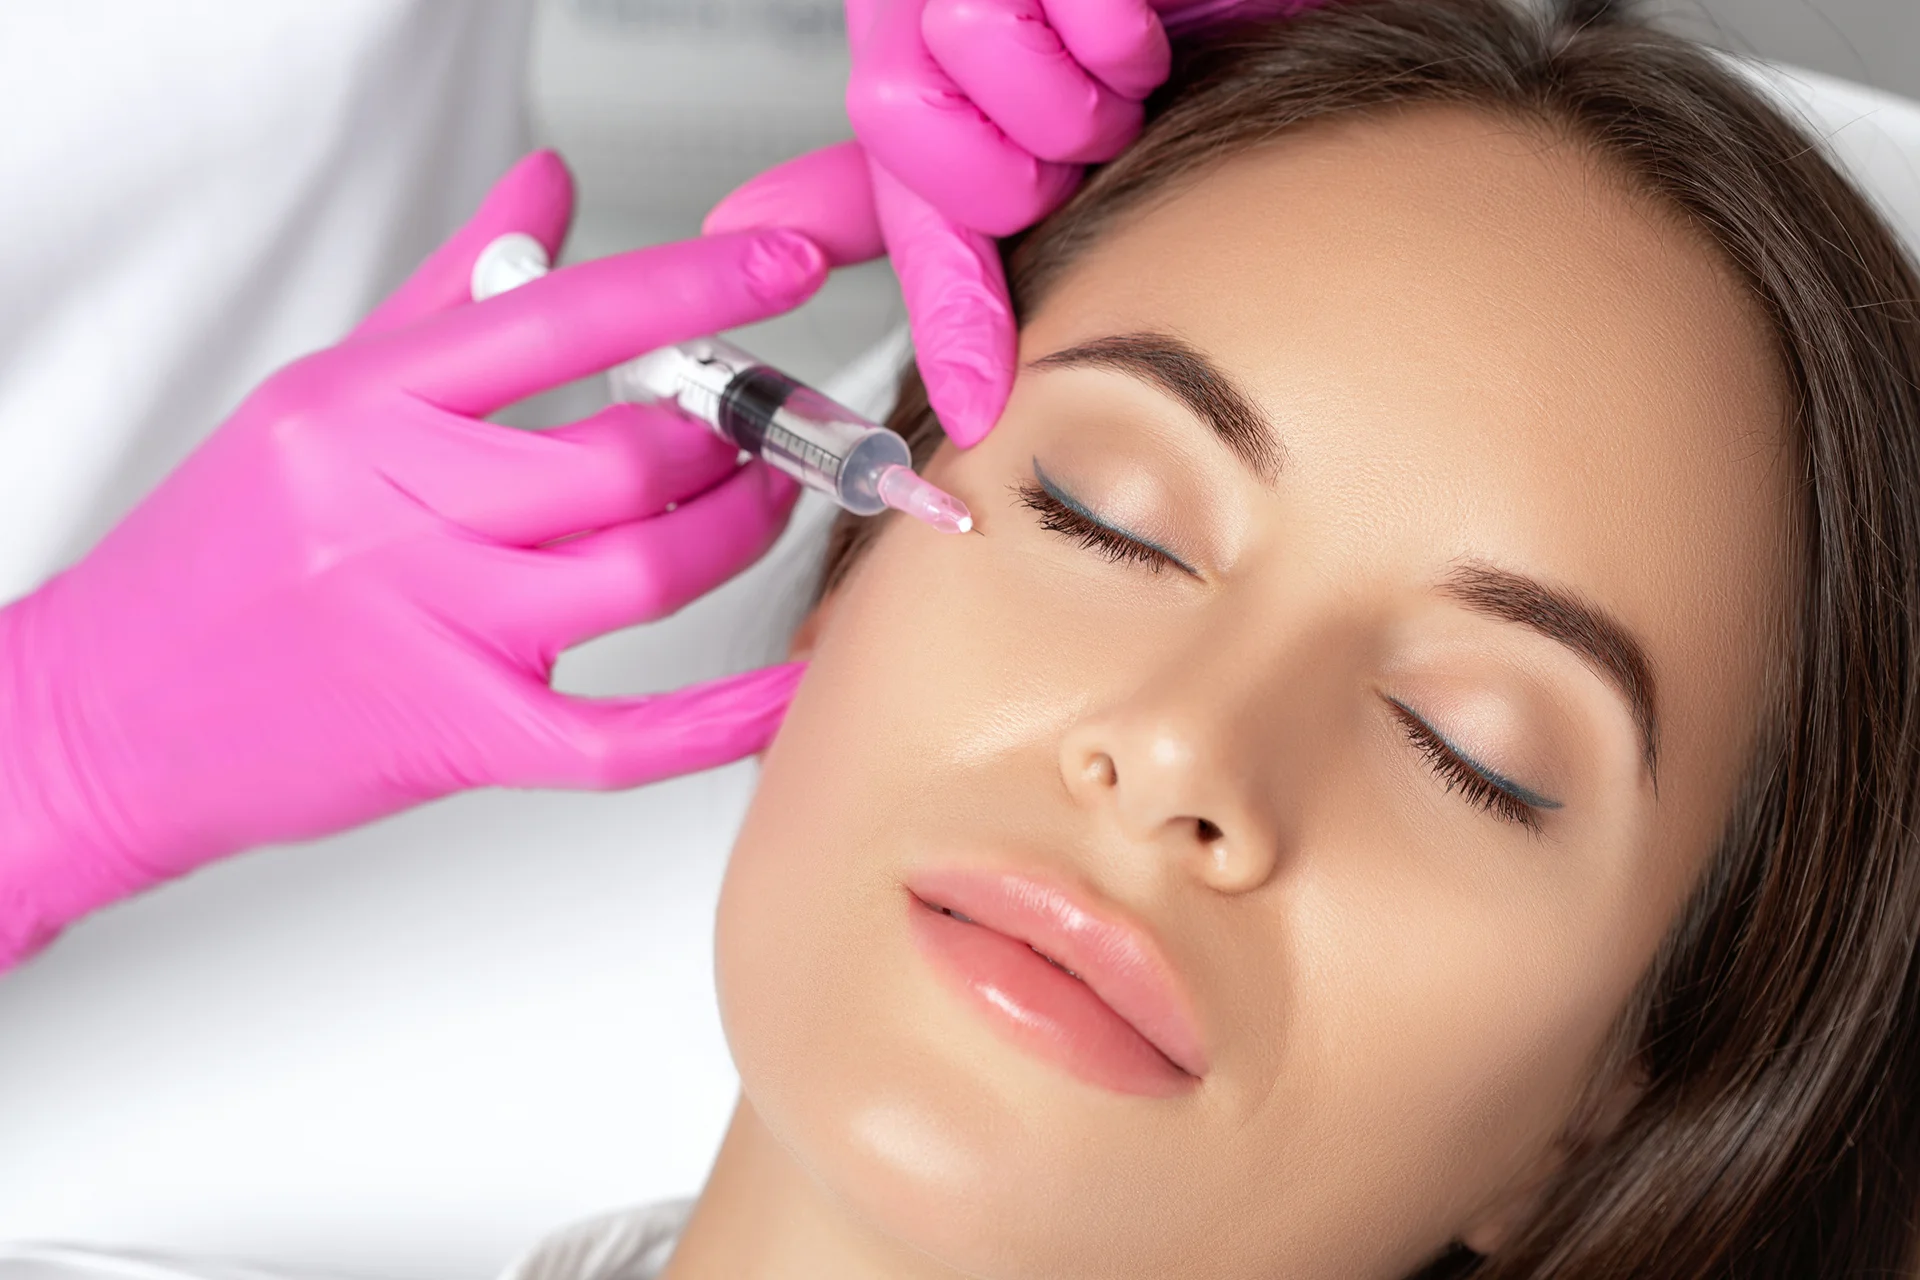 Non-surgical cosmetic services